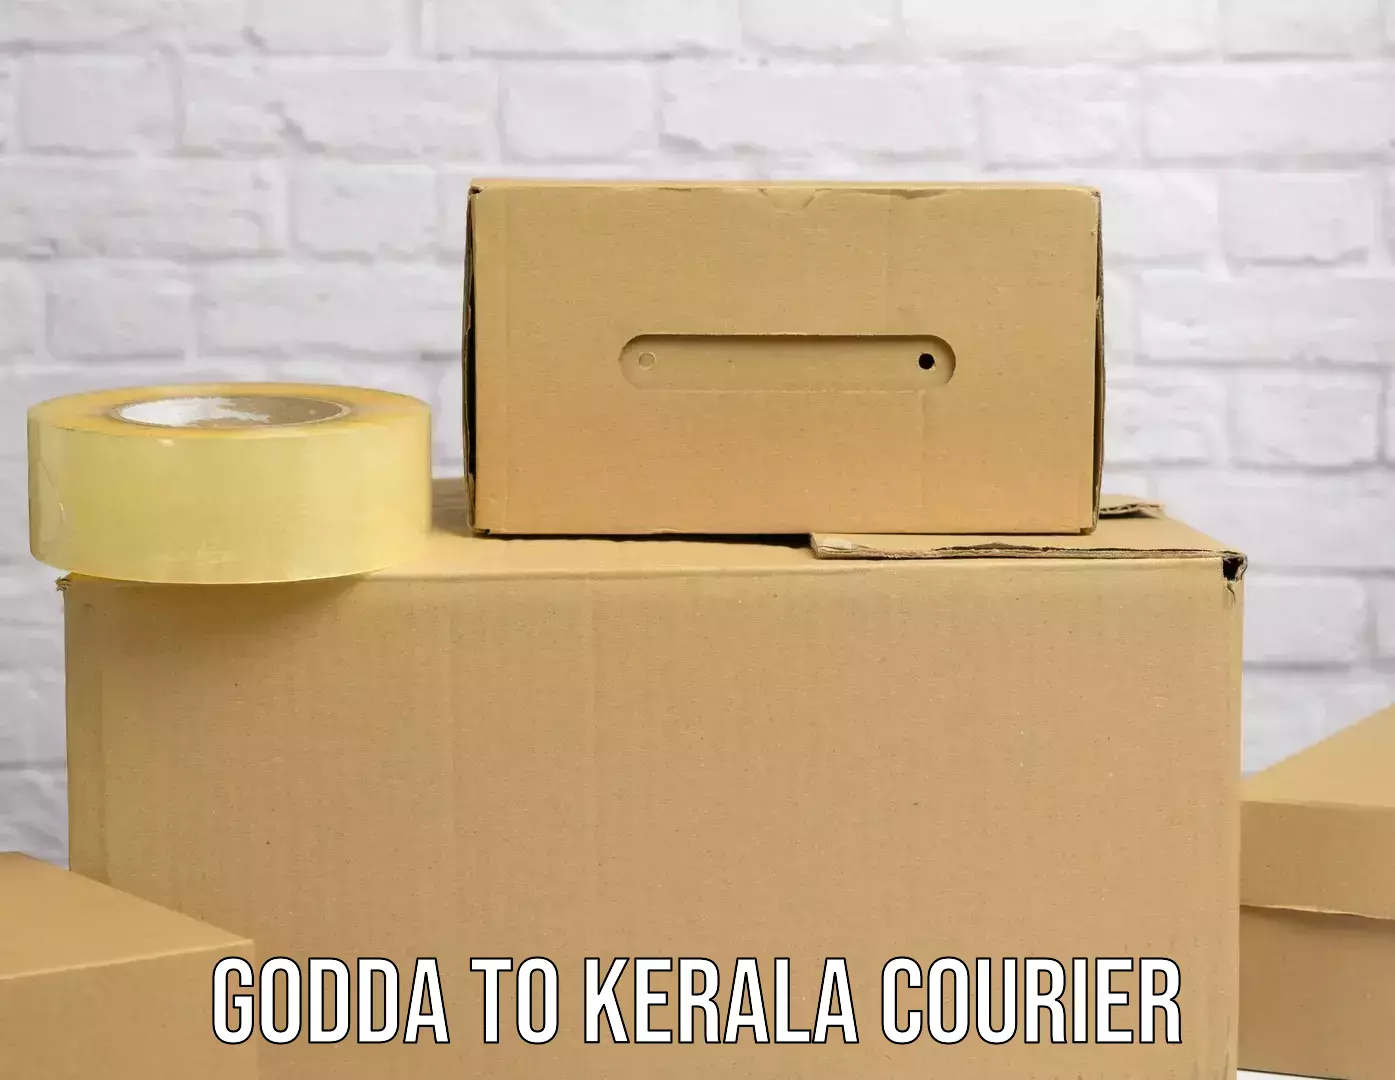 Sustainable delivery practices Godda to Kerala